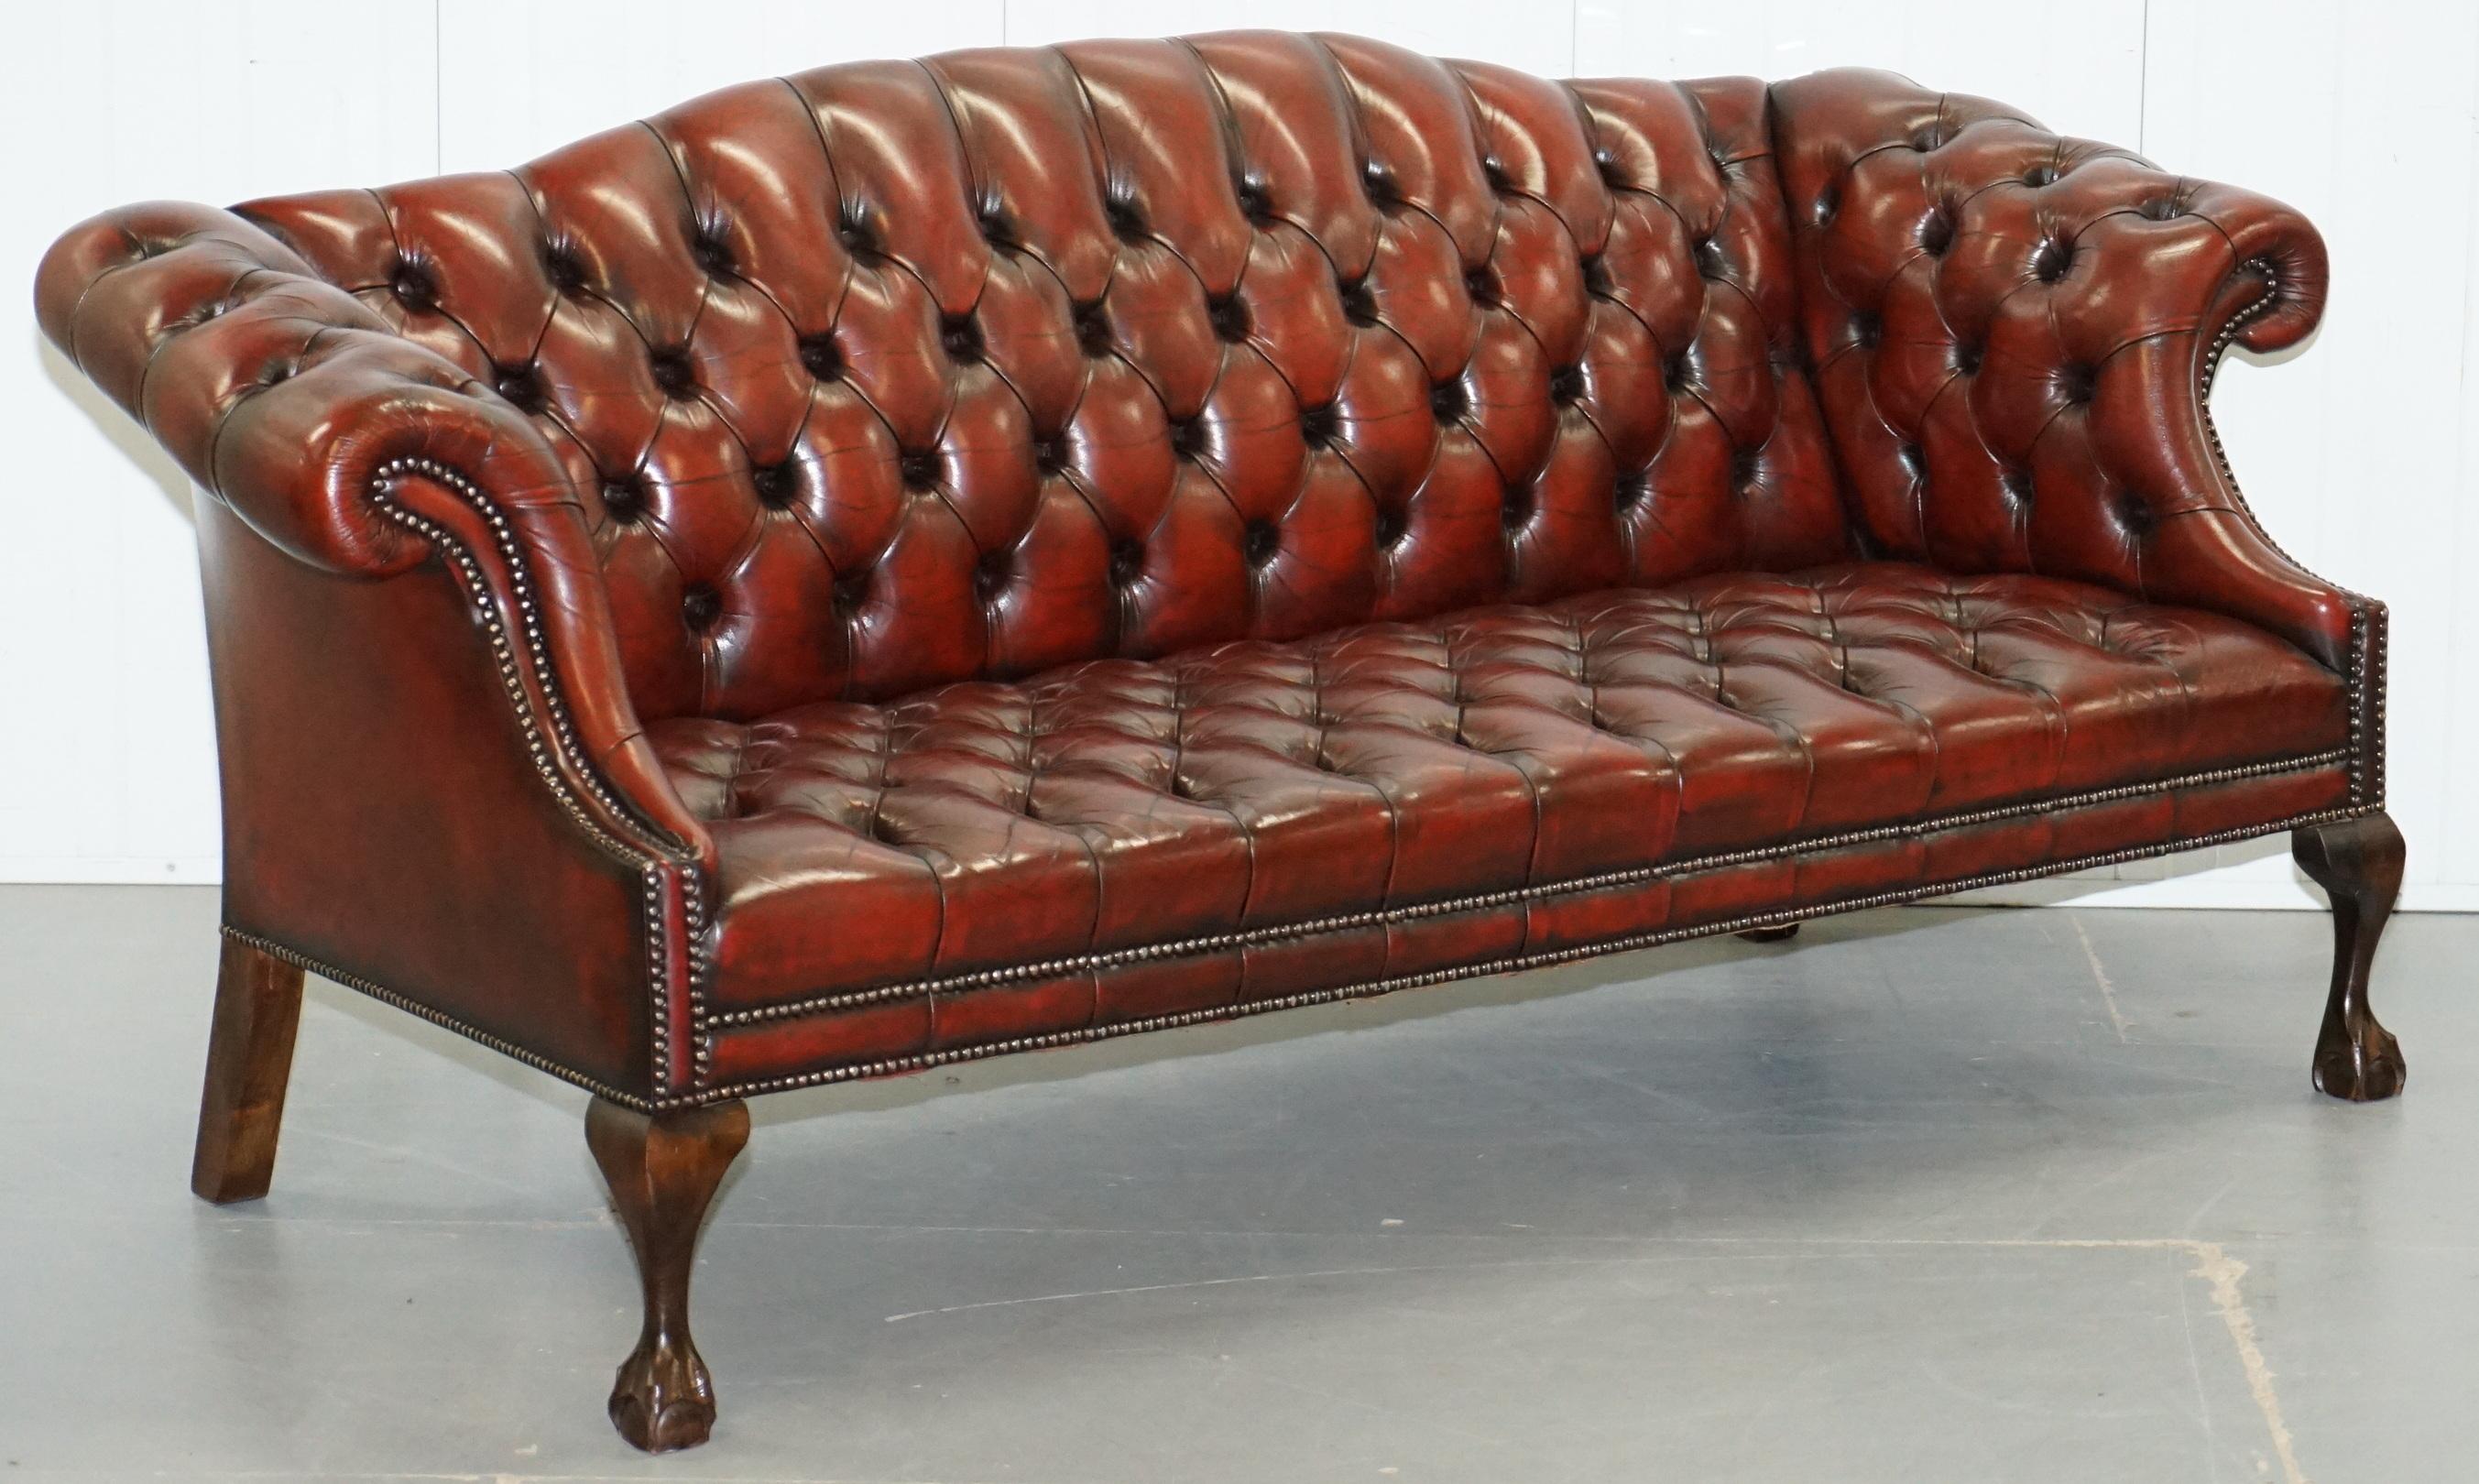 We are delighted to offer for sale this stunning pair of fully restored hump / camel back regency style Chesterfield buttoned sofas with hand carved claw and ball feet.

A very attractive and well made pair, the design originally dates back to the